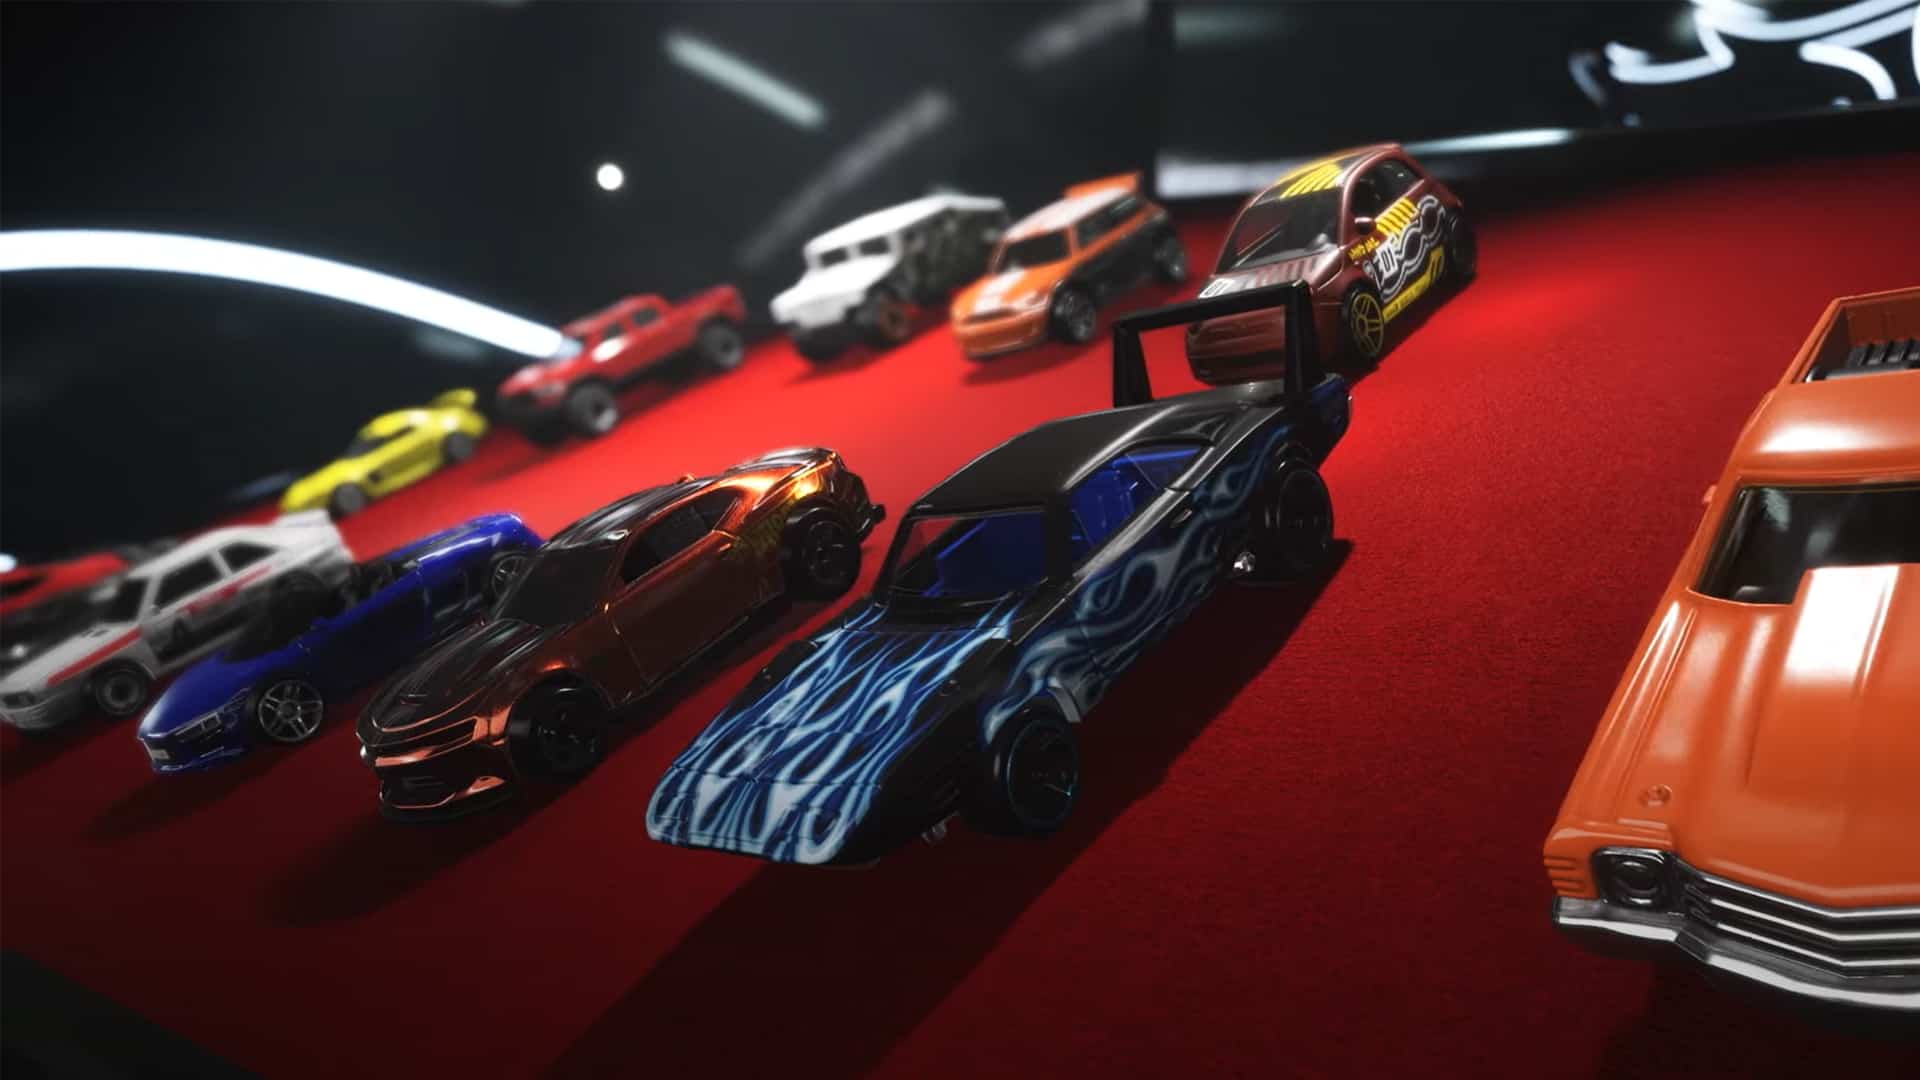 Hot Wheels Unleashed includes licensed vehicles